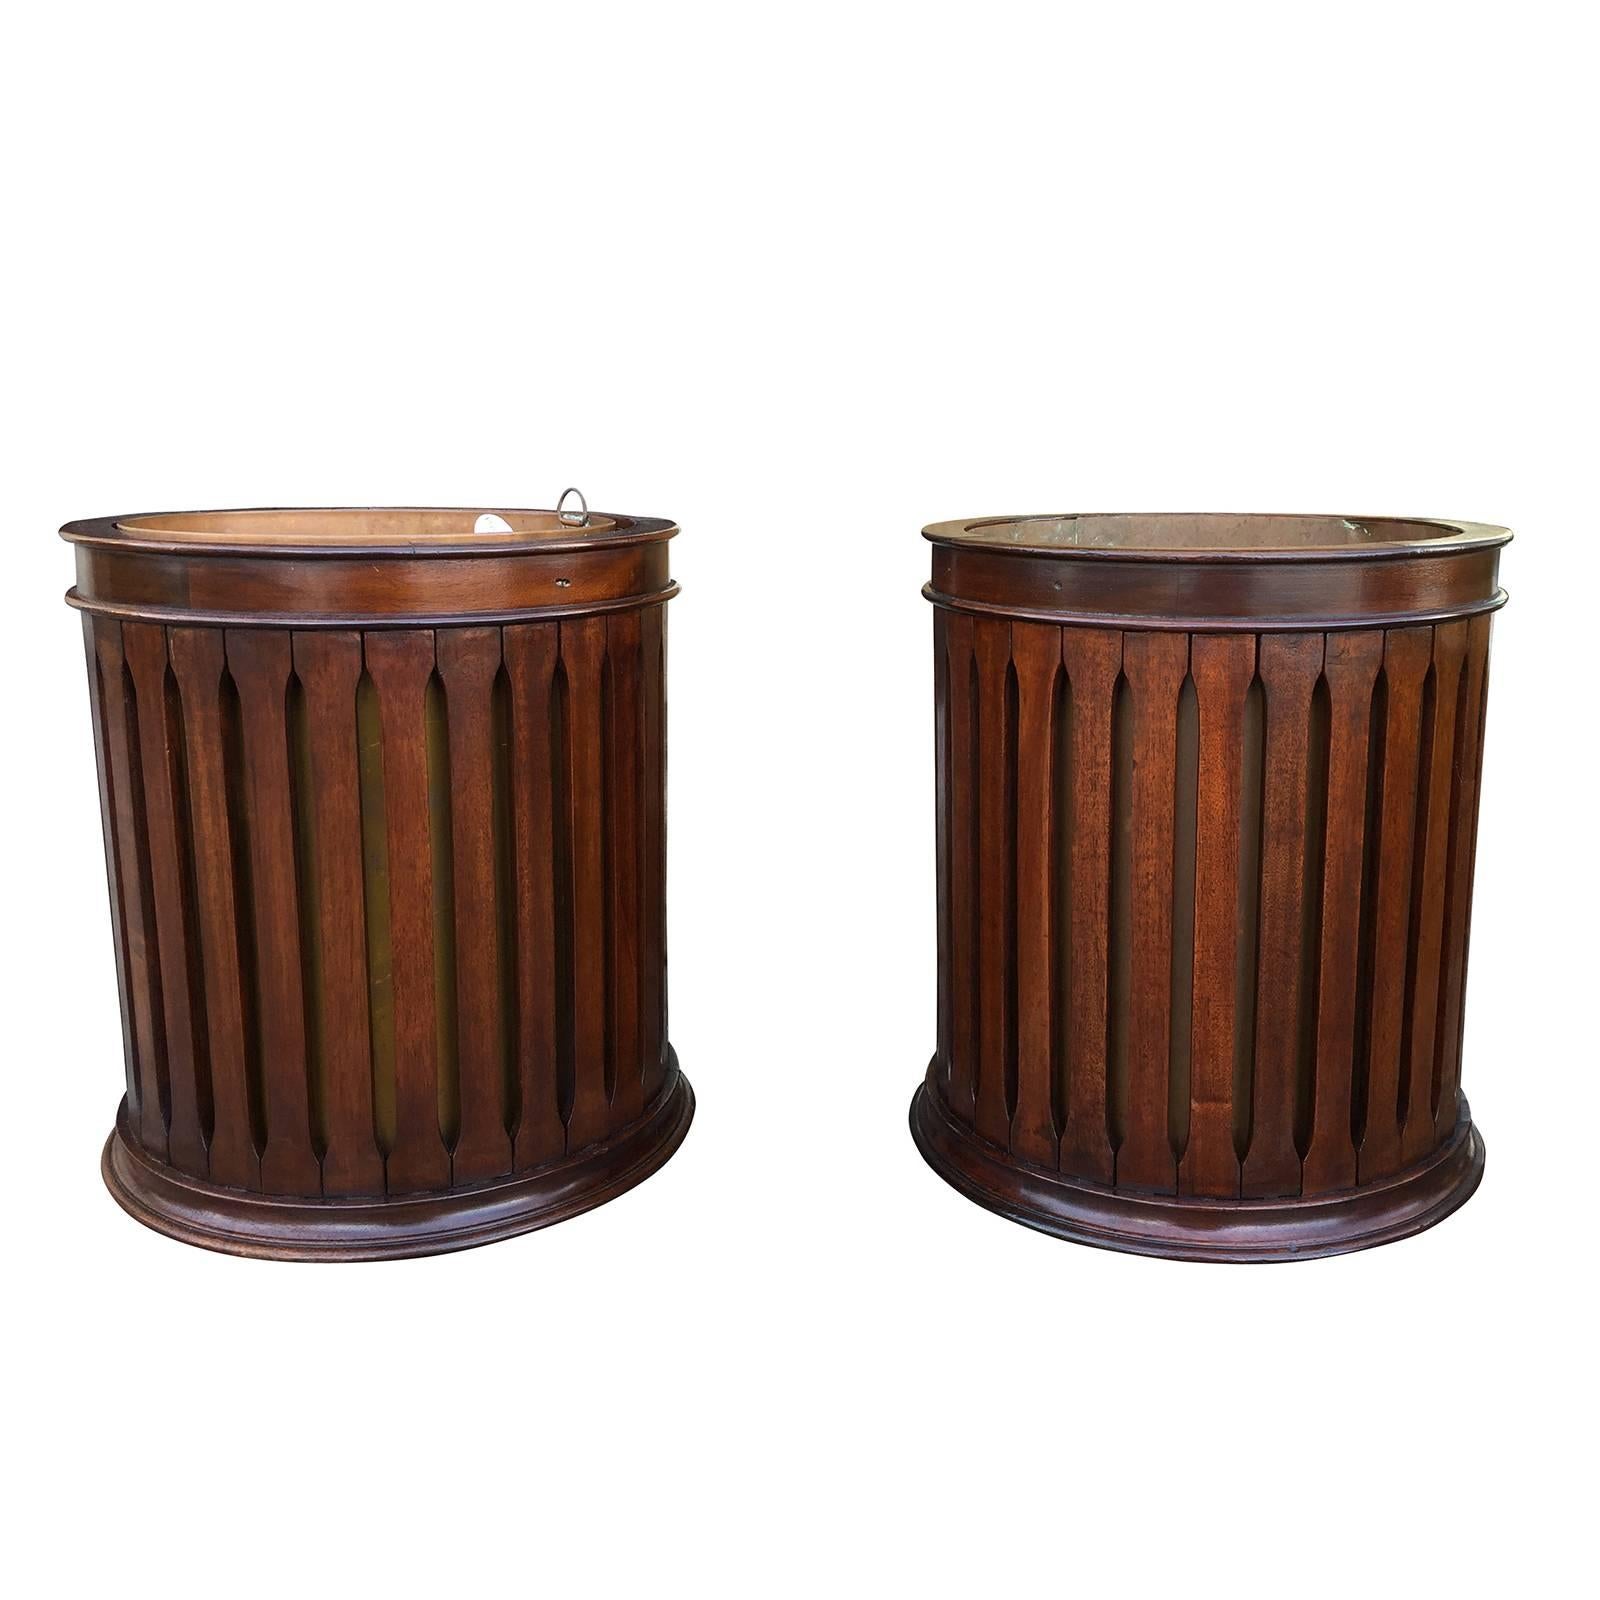 Pair of 19th Century Copper Lined English Buckets in the Style of George III